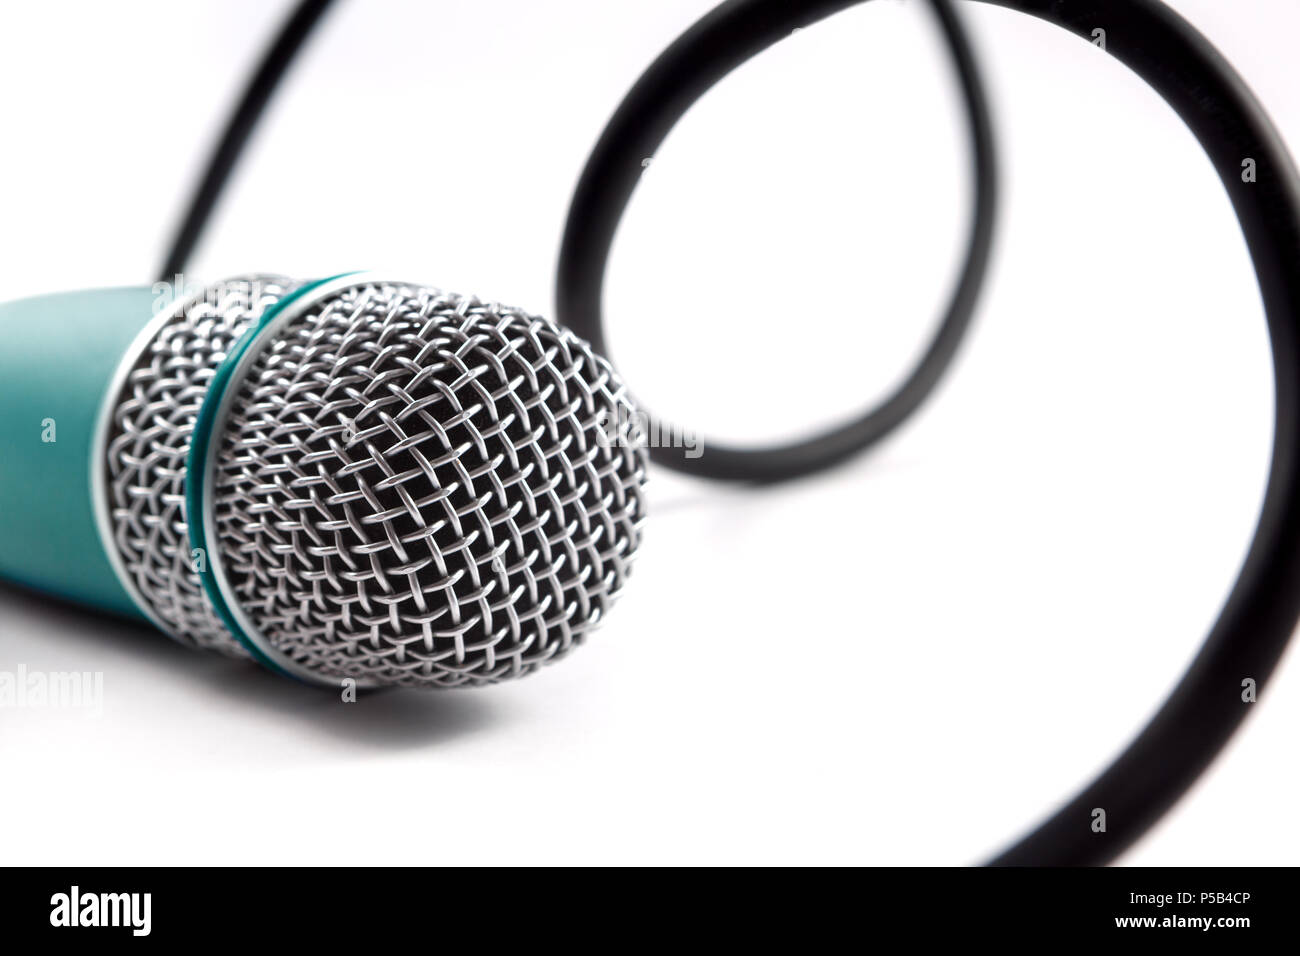 microphone close up image.Karaoke and music background Stock Photo